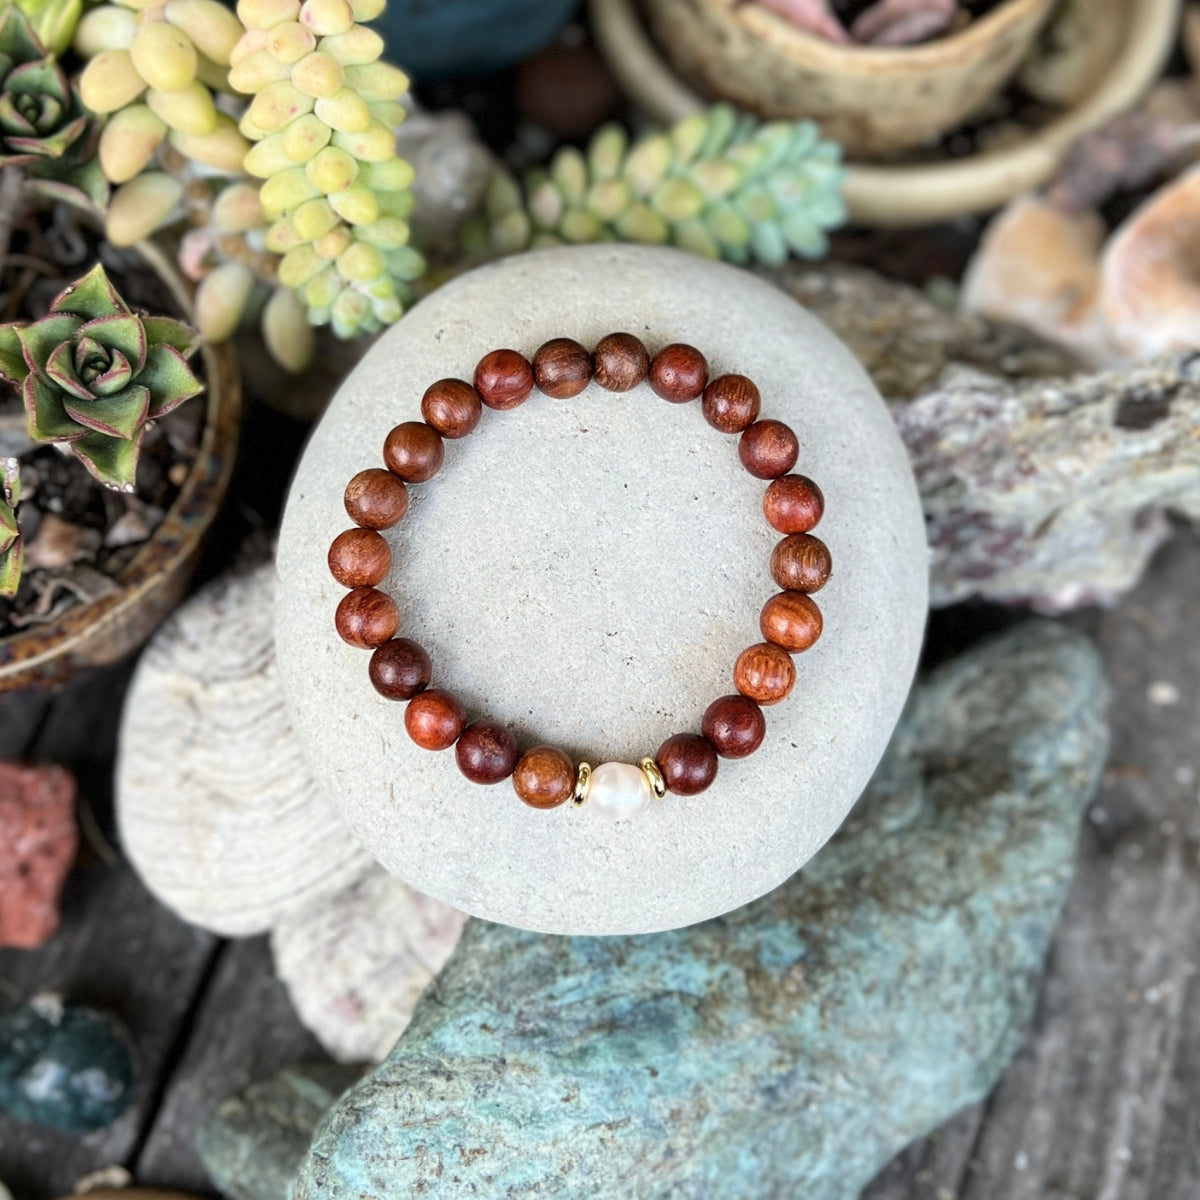 Introducing "My Sanctuary" - The Meditation Mala Wood and Pearl Jewelry Set, a harmonious fusion of nature's embrace and tranquil elegance. 